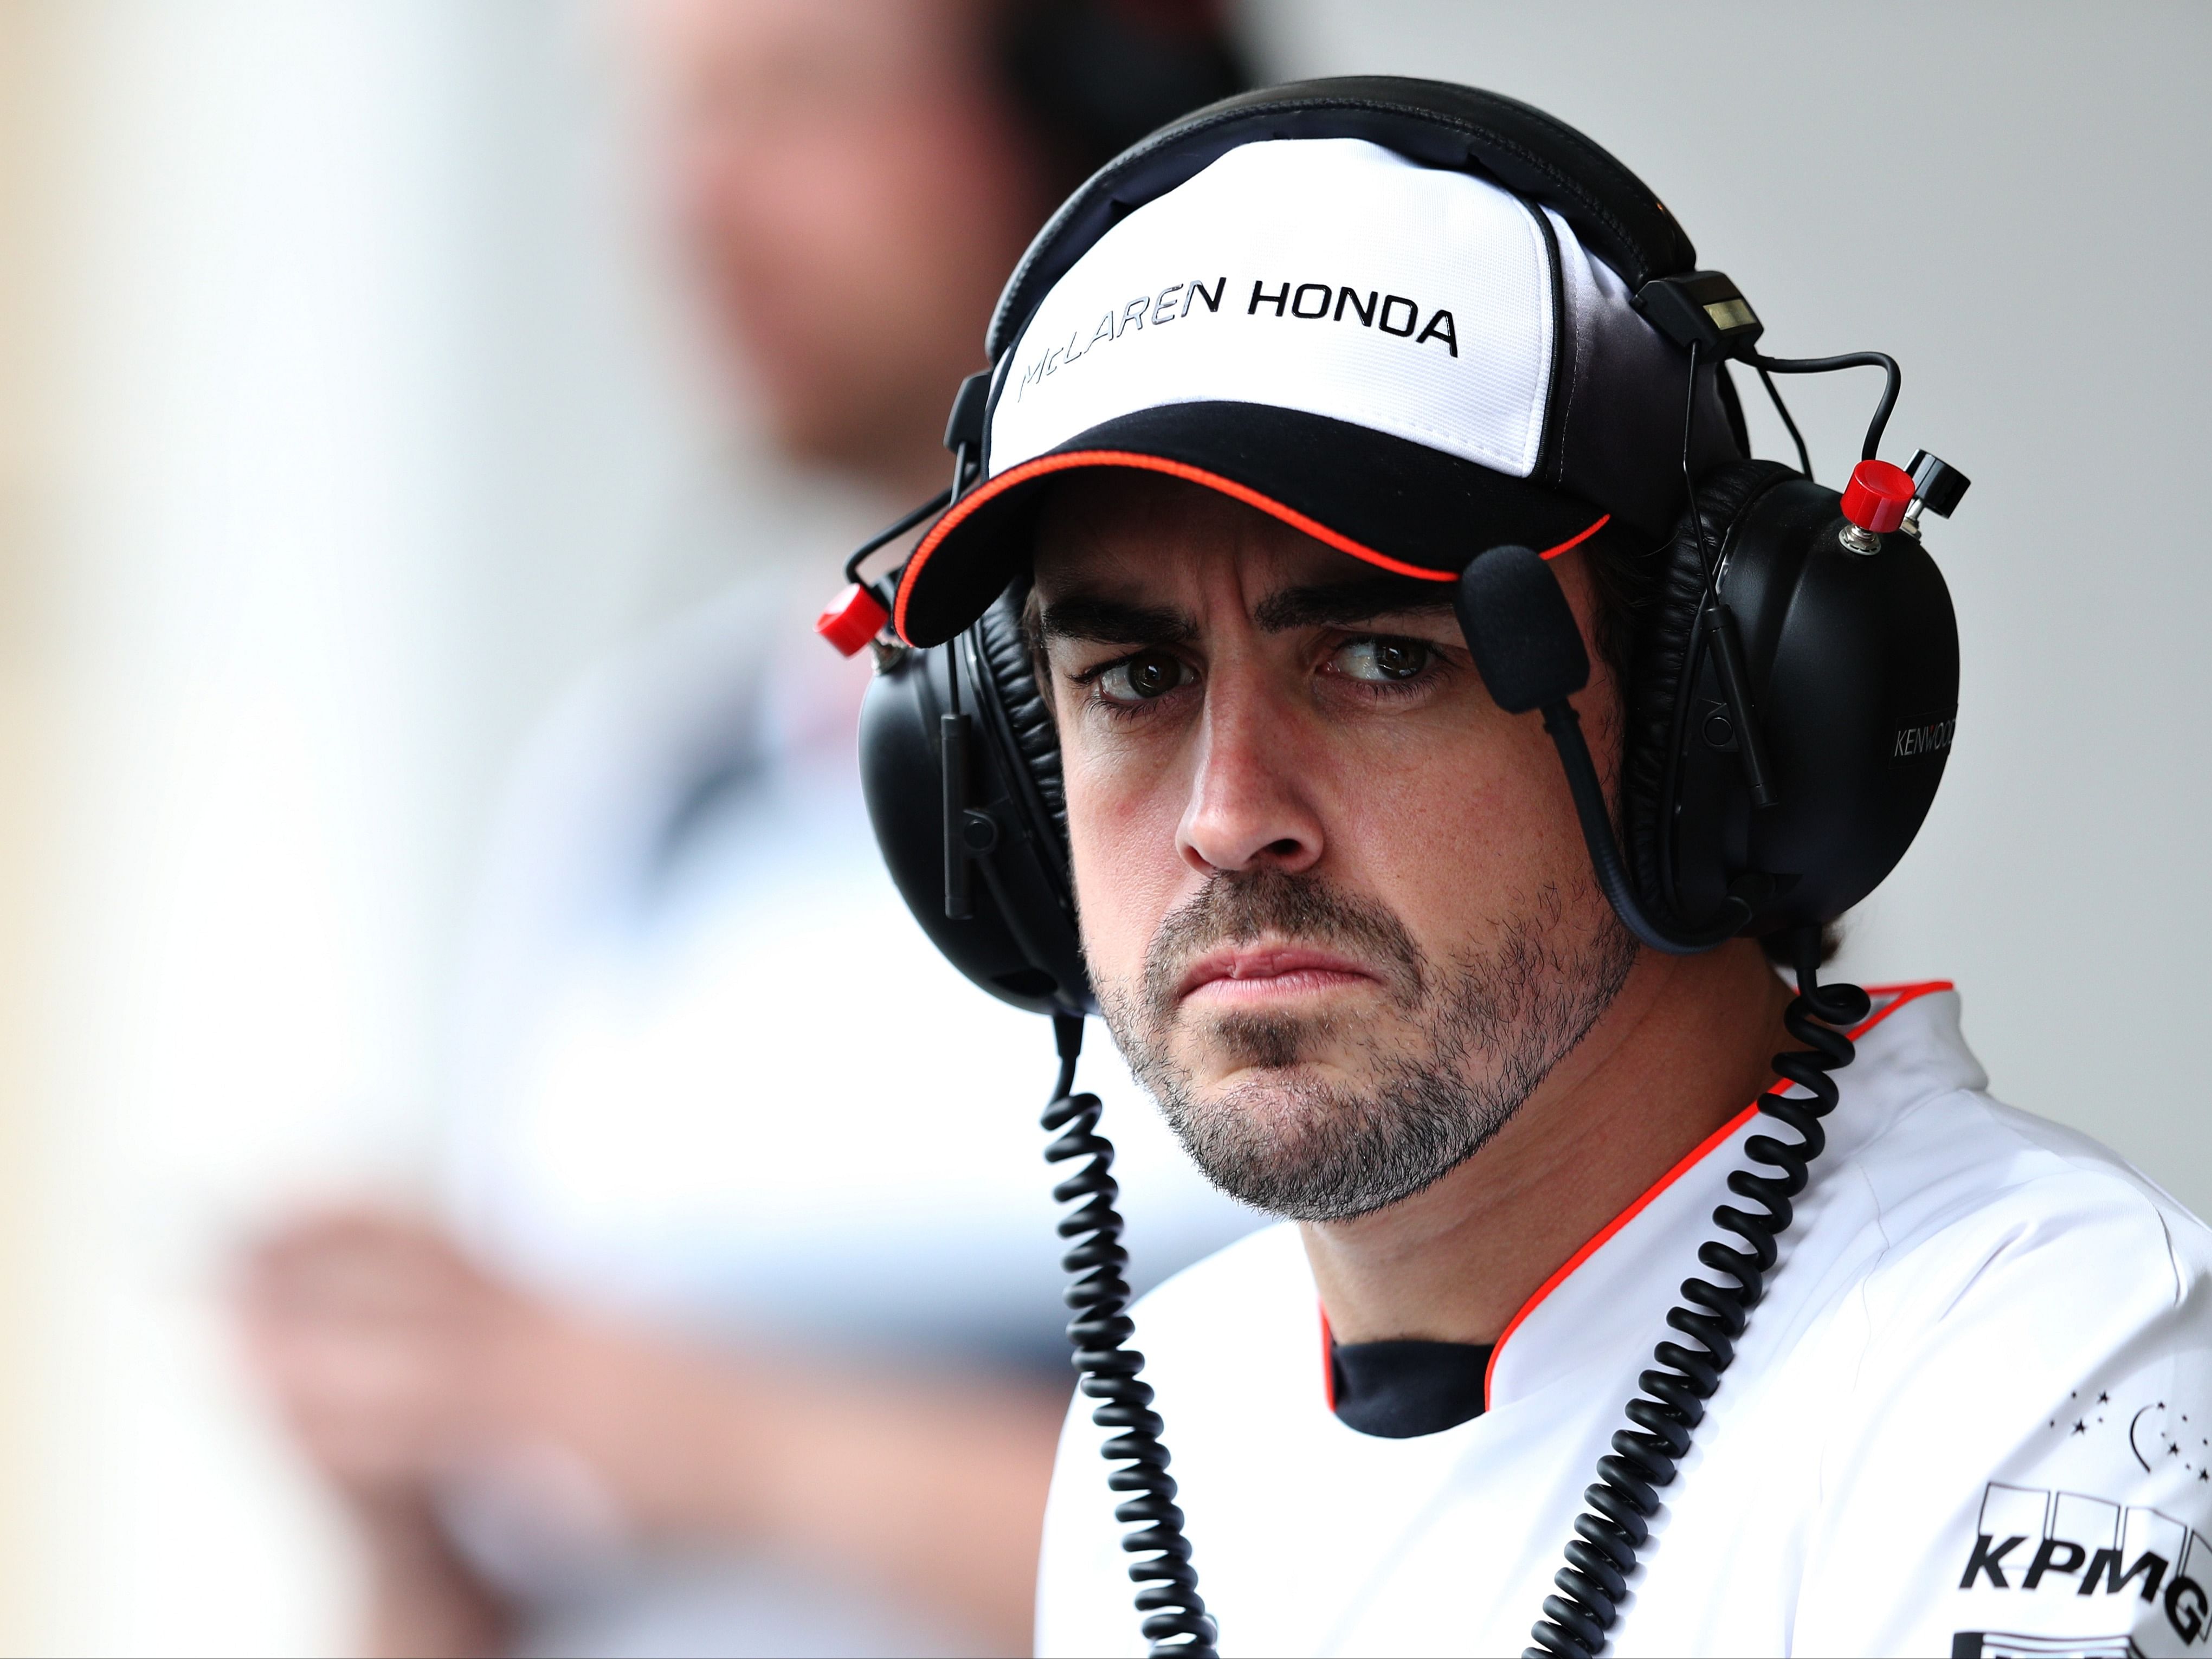 Fernando Alonso watches the action in the pitlane during practice for the 2016 F1 Bahrain Grand Prix. (Photo by Mark Thompson/Getty Images)